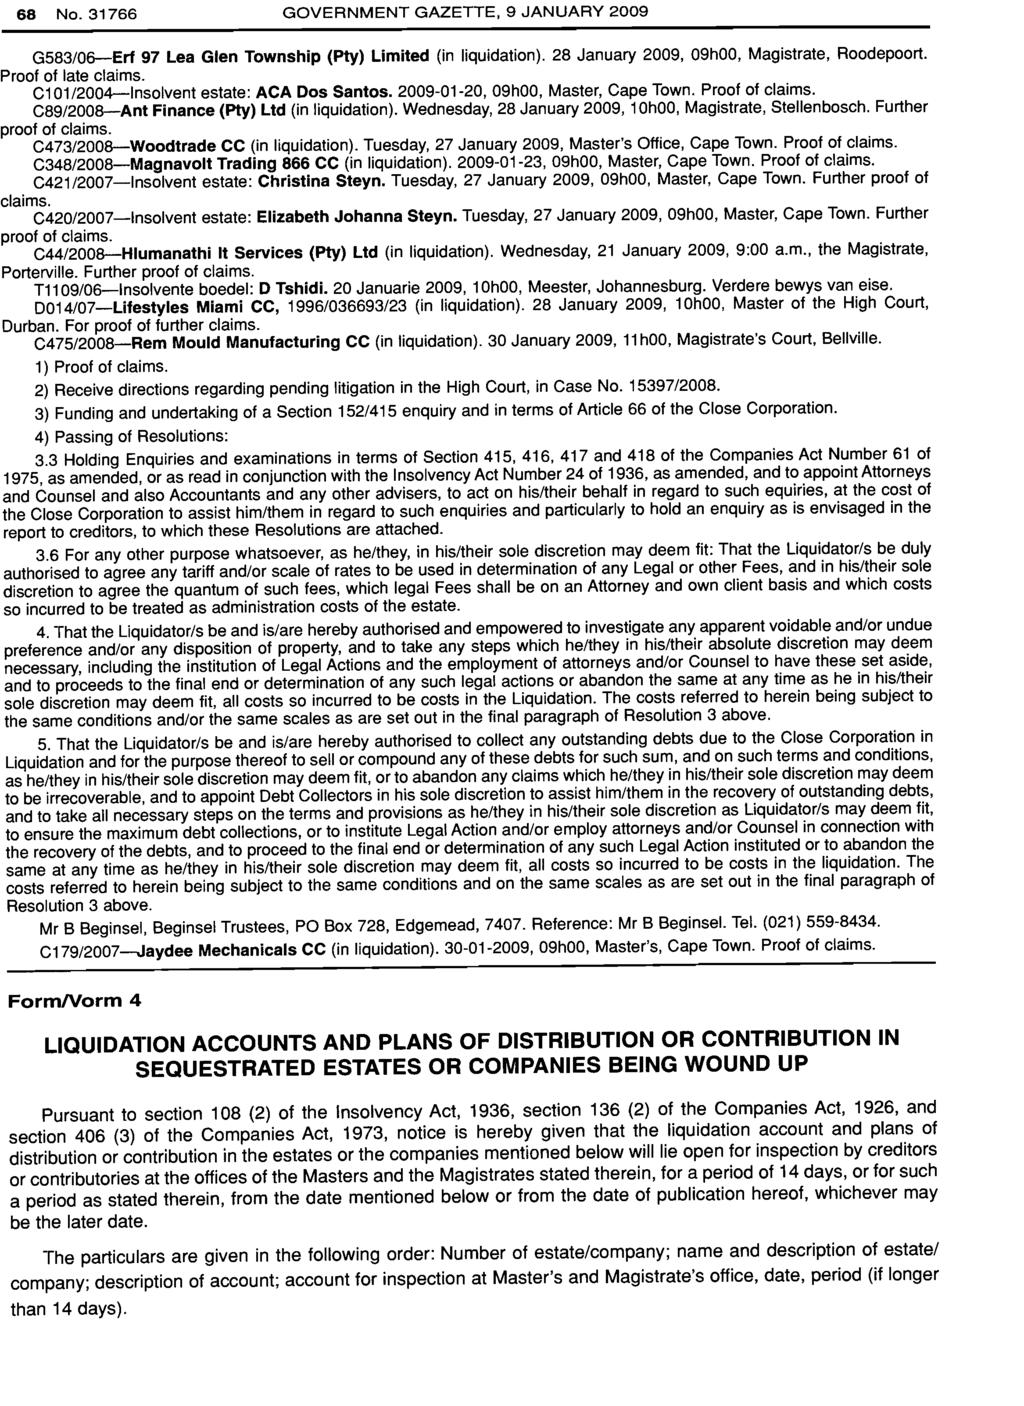 68 No. 31766 GOVERNMENT GAZETTE, 9 JANUARY 2009 G583/06-Erf 97 Lea Glen Township (Ply) Limited (in liquidation). 28 January 2009, 09hOO, Magistrate, Roodepoort. Proof of late claims.